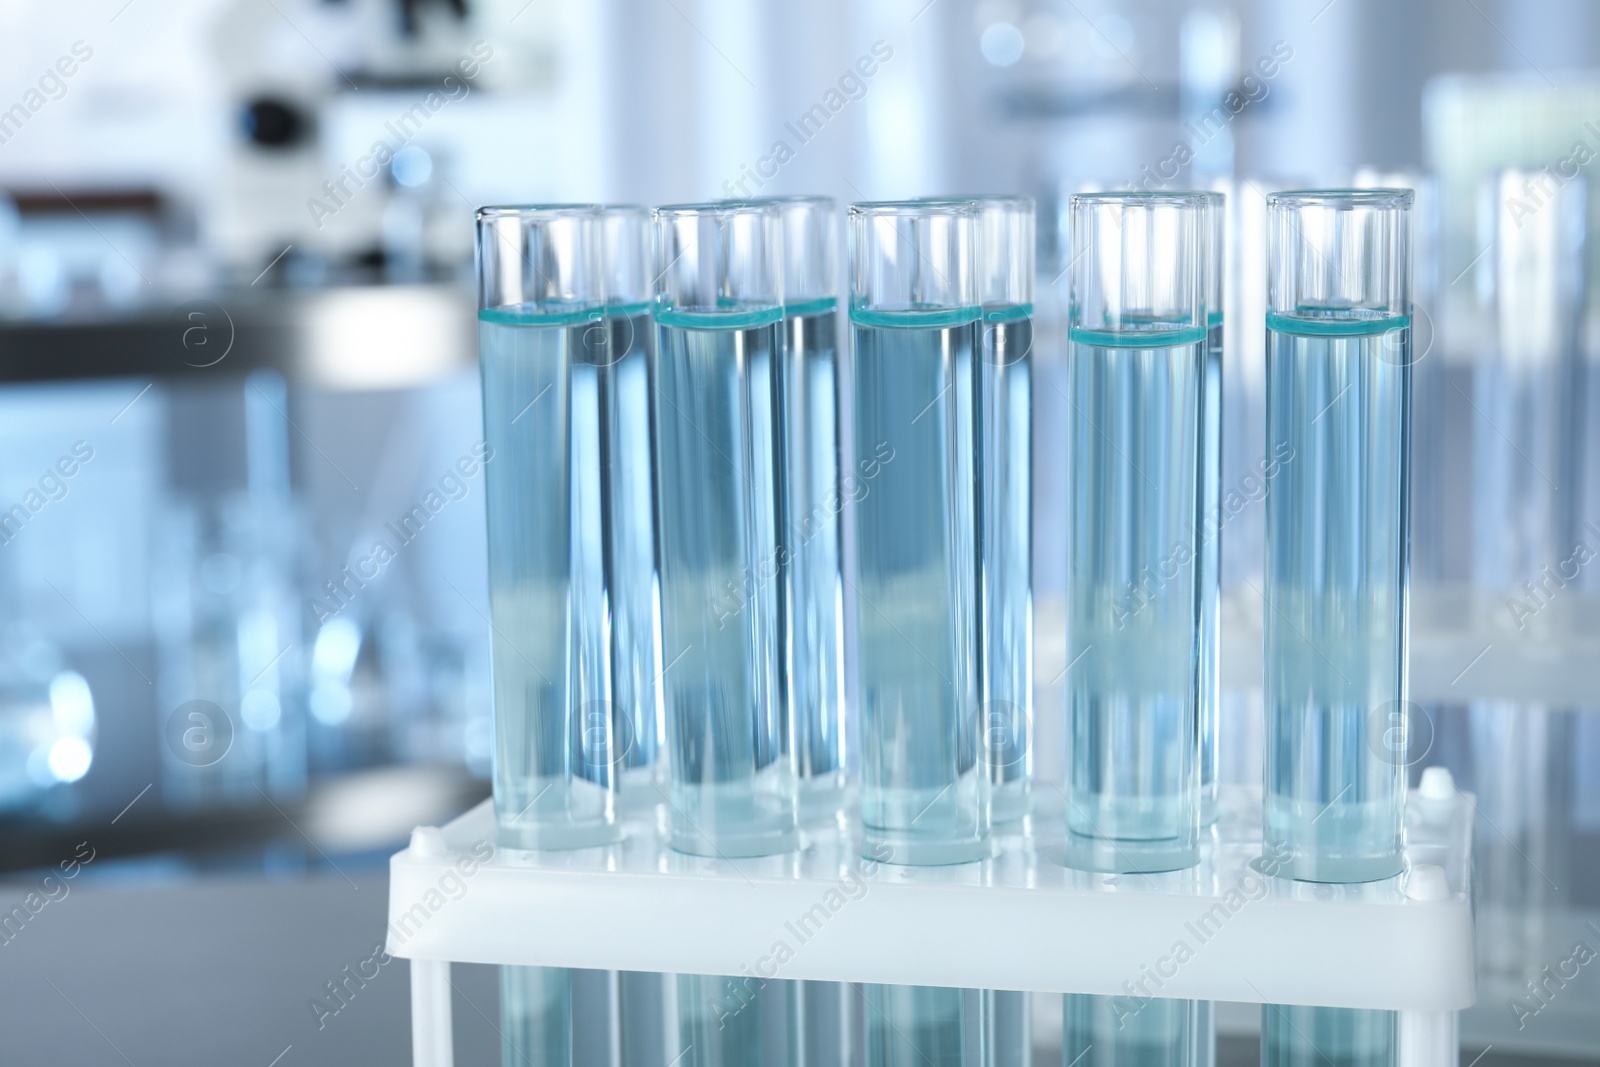 Photo of Test tubes with liquid on blurred background, closeup. Laboratory analysis